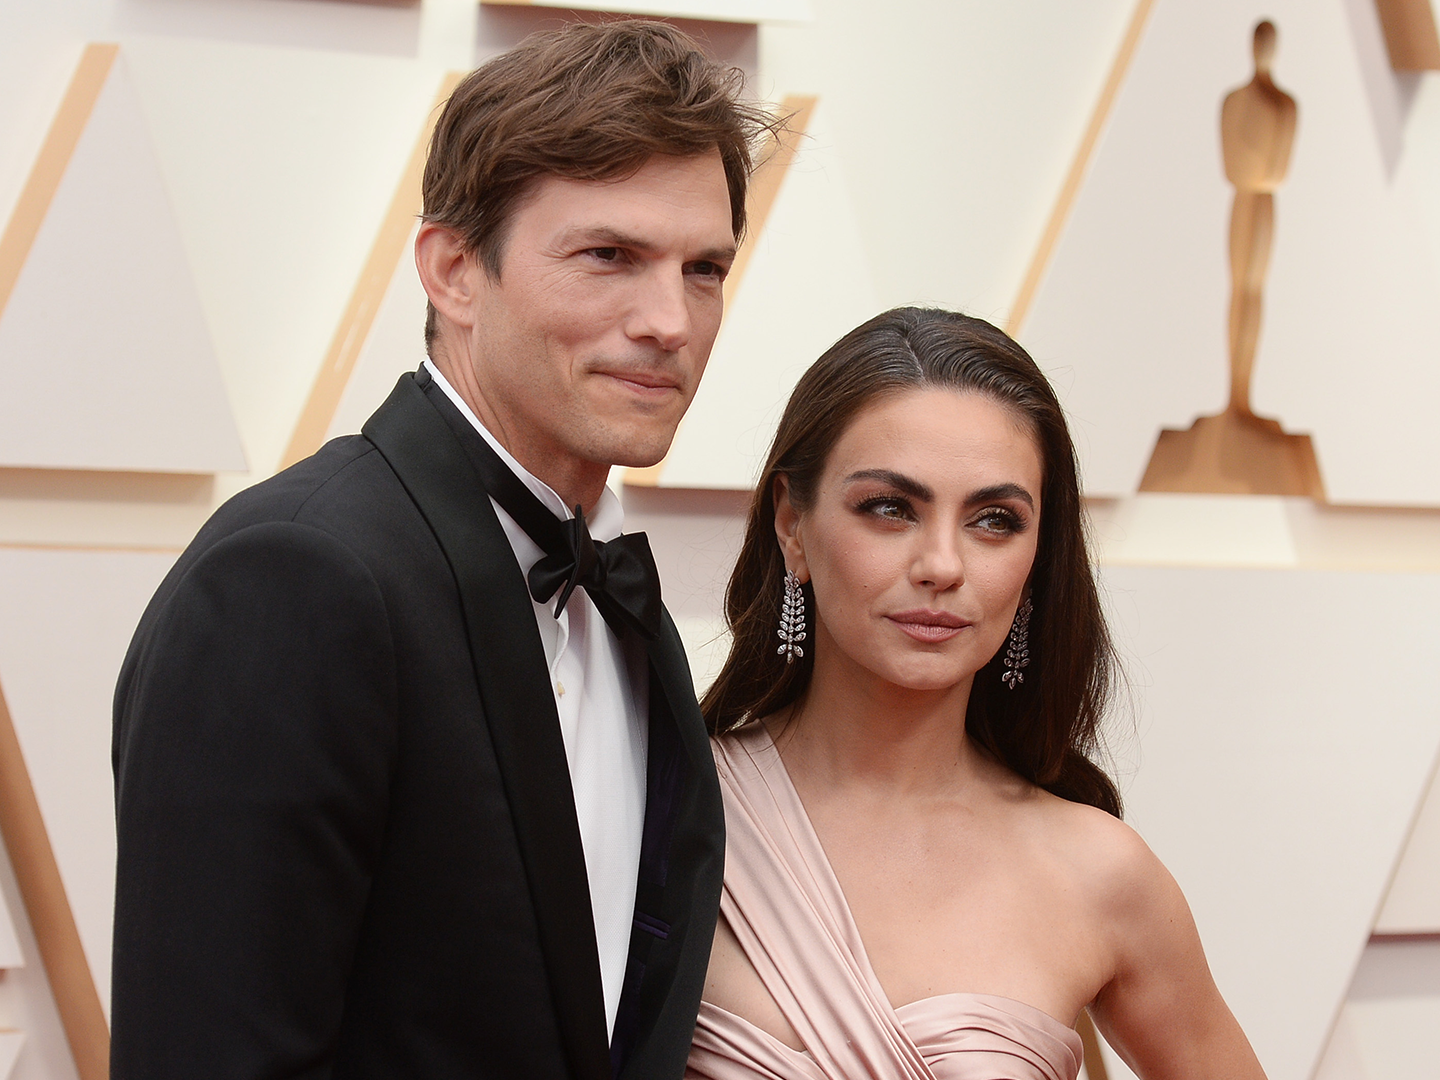 Relationship Experts Claim This Part of Mila Kunis & Ashton Kutcher’s Jobs May Deteriorate Their Marriage